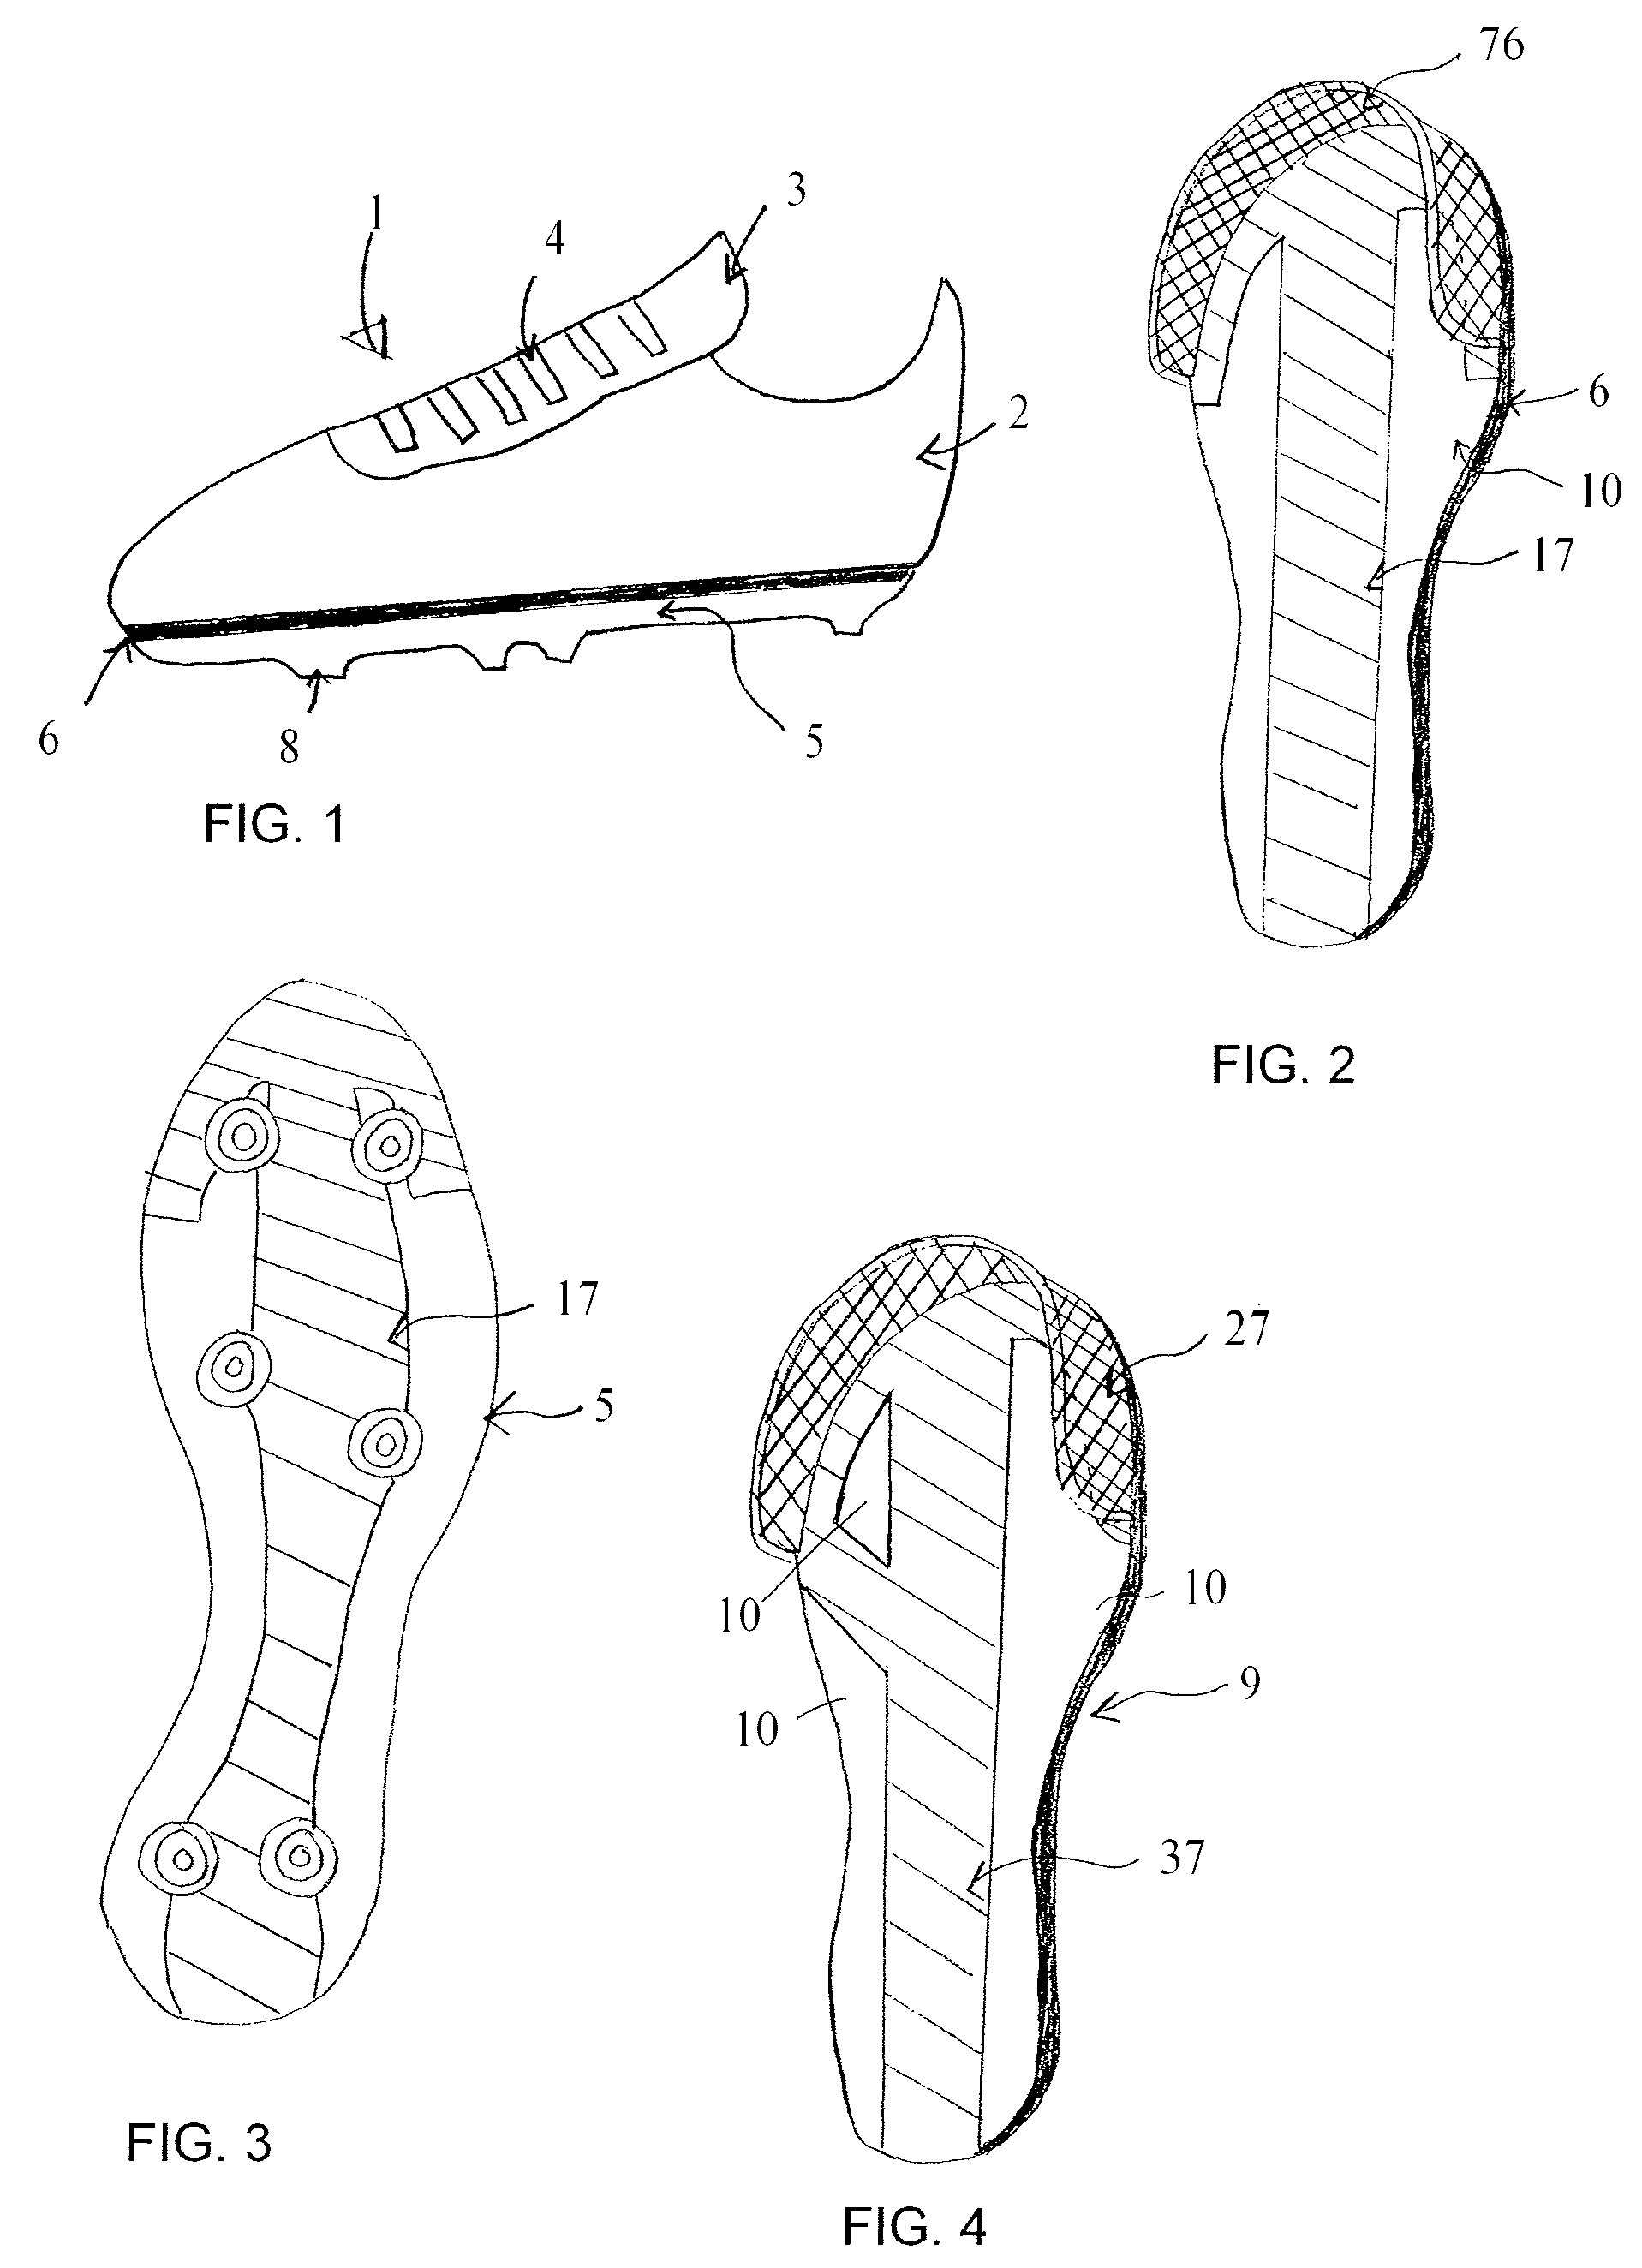 Soccer shoe component or insert made of one material and/or a composite and/or laminate of one or more materials for enhancing the performance of the soccer shoe